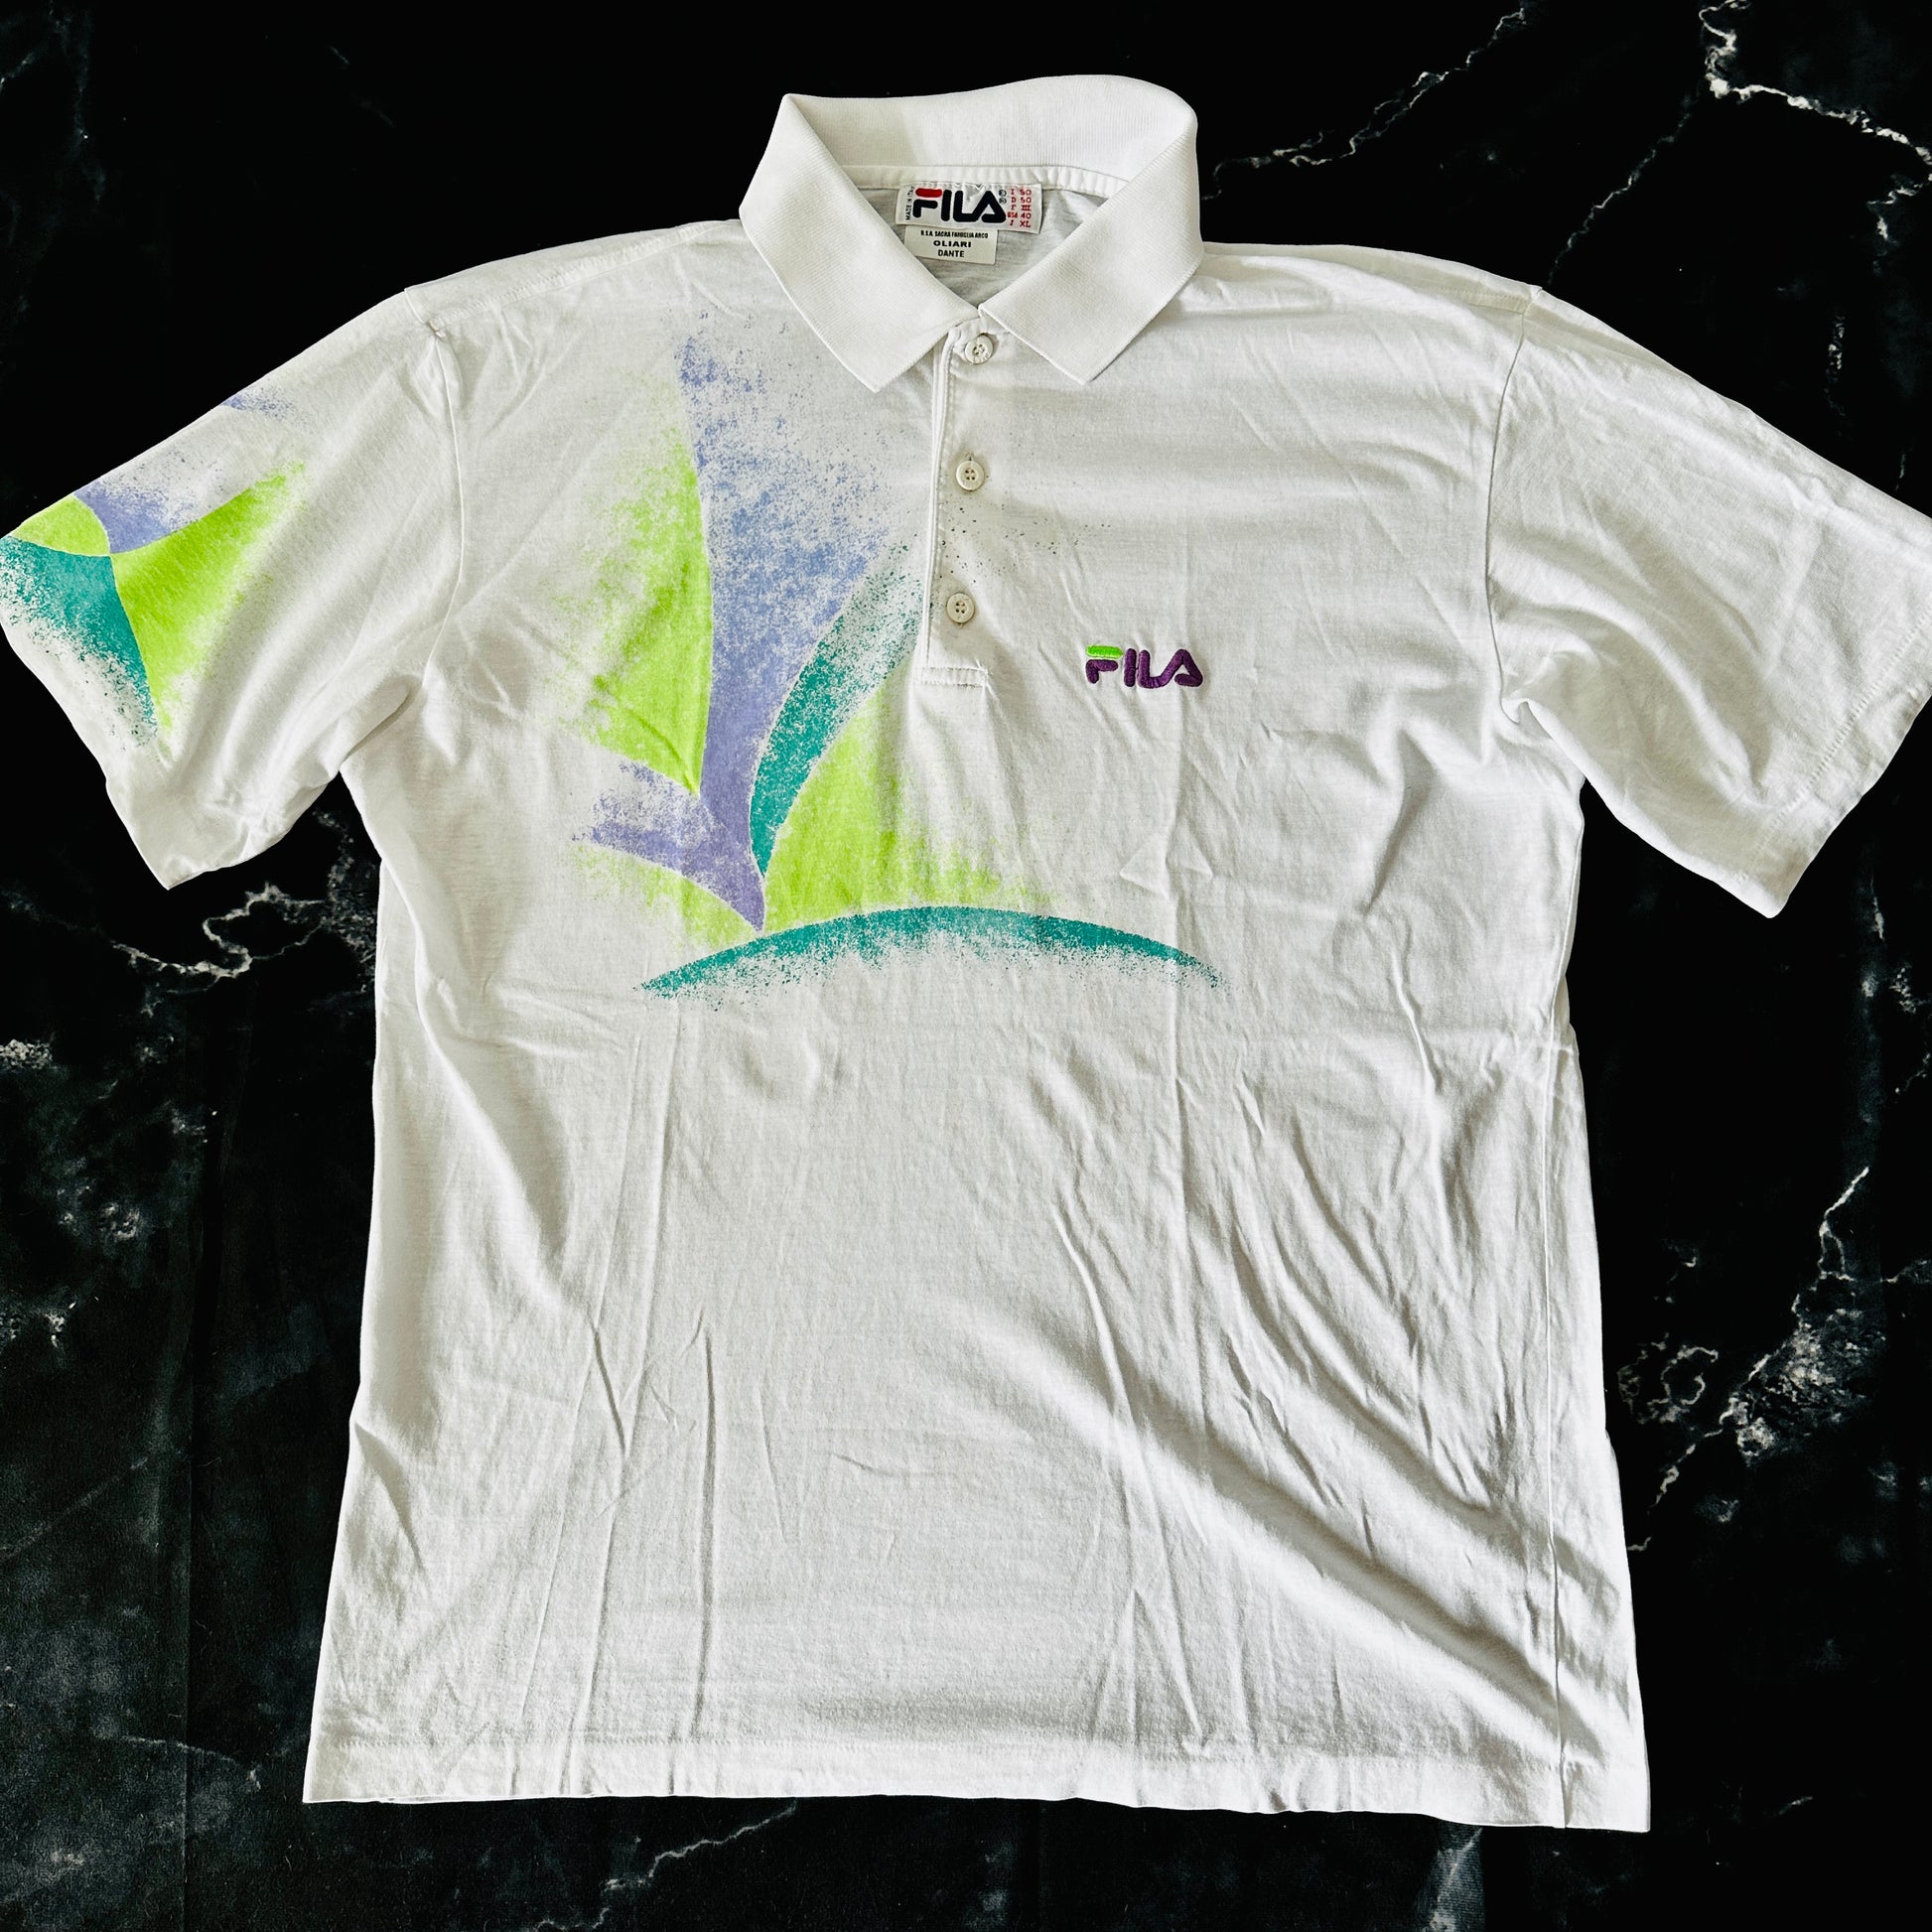 Fila Vintage 80s Tennis Polo Shirt - 50 / M - Made in Italy –